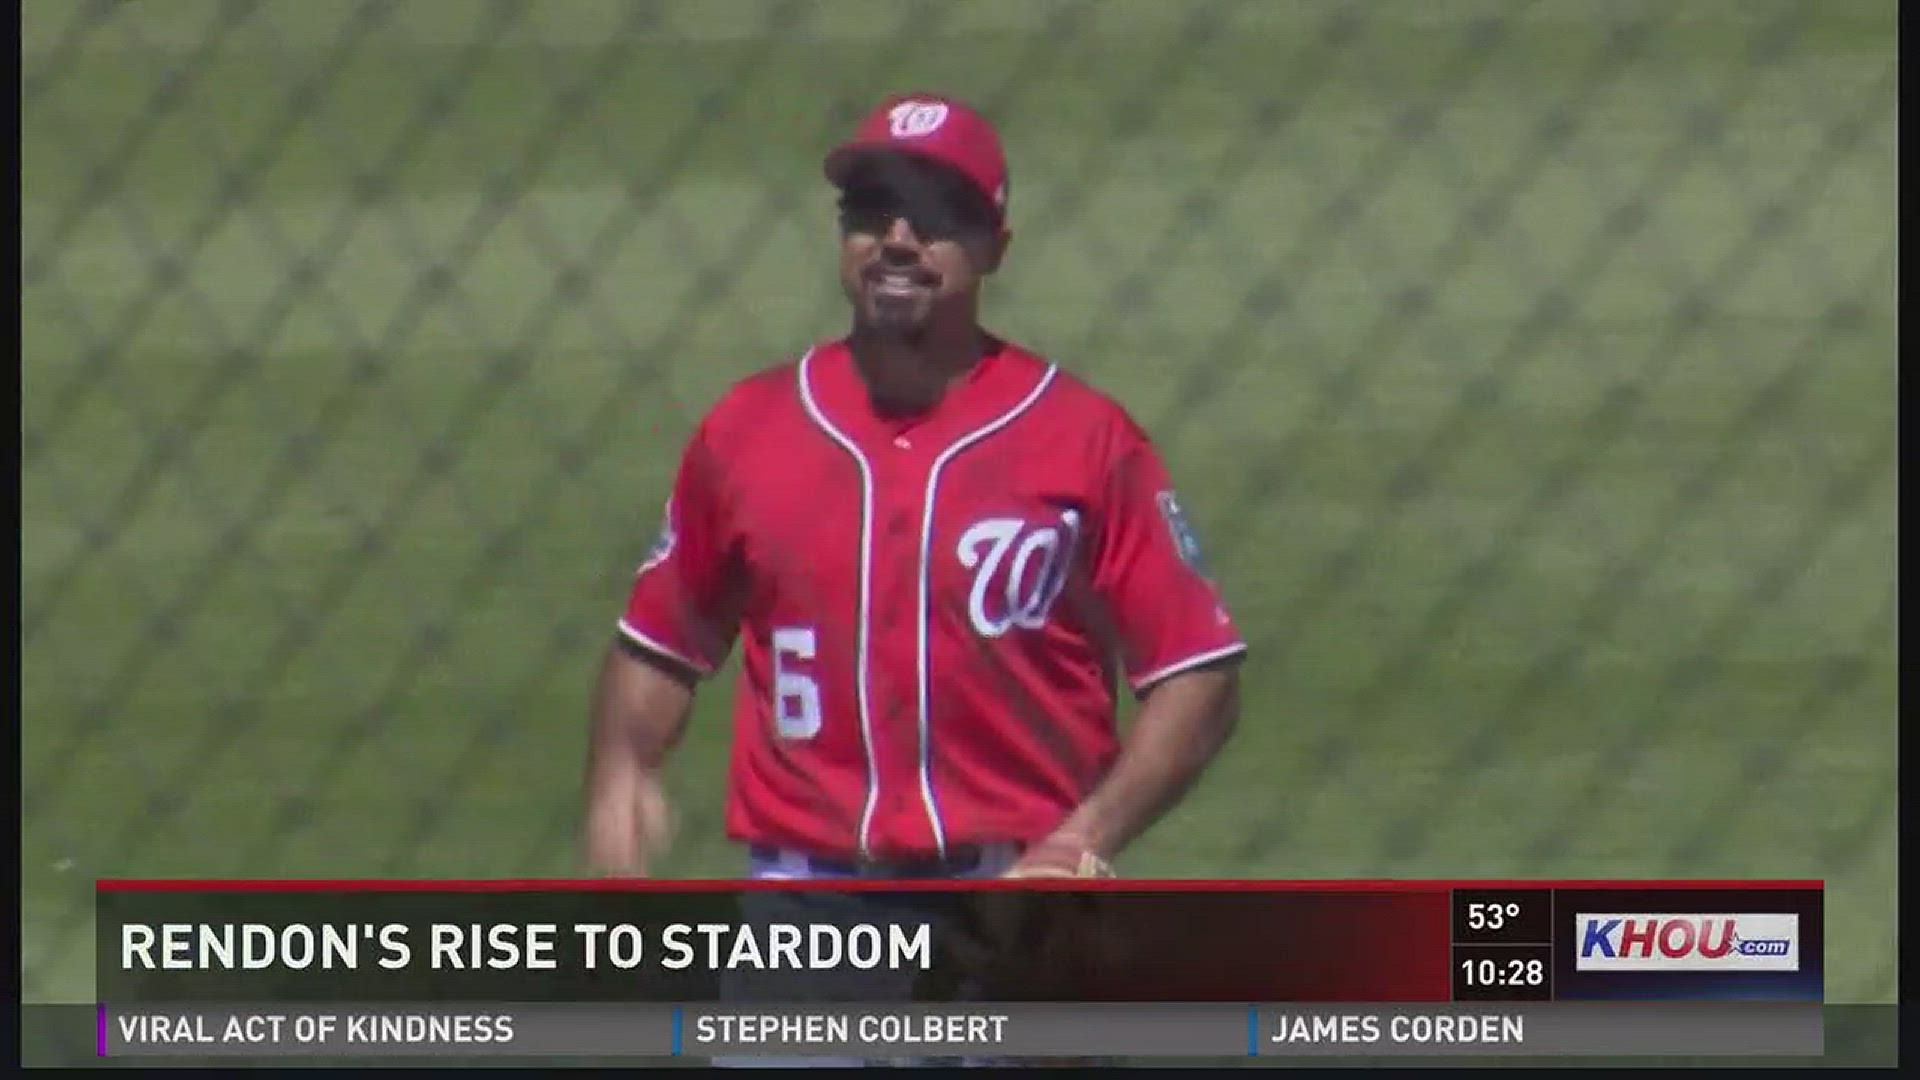 Anthony Rendon has carved his own path in baseball, KHOU 11 Sports' Daniel Gotera reports.